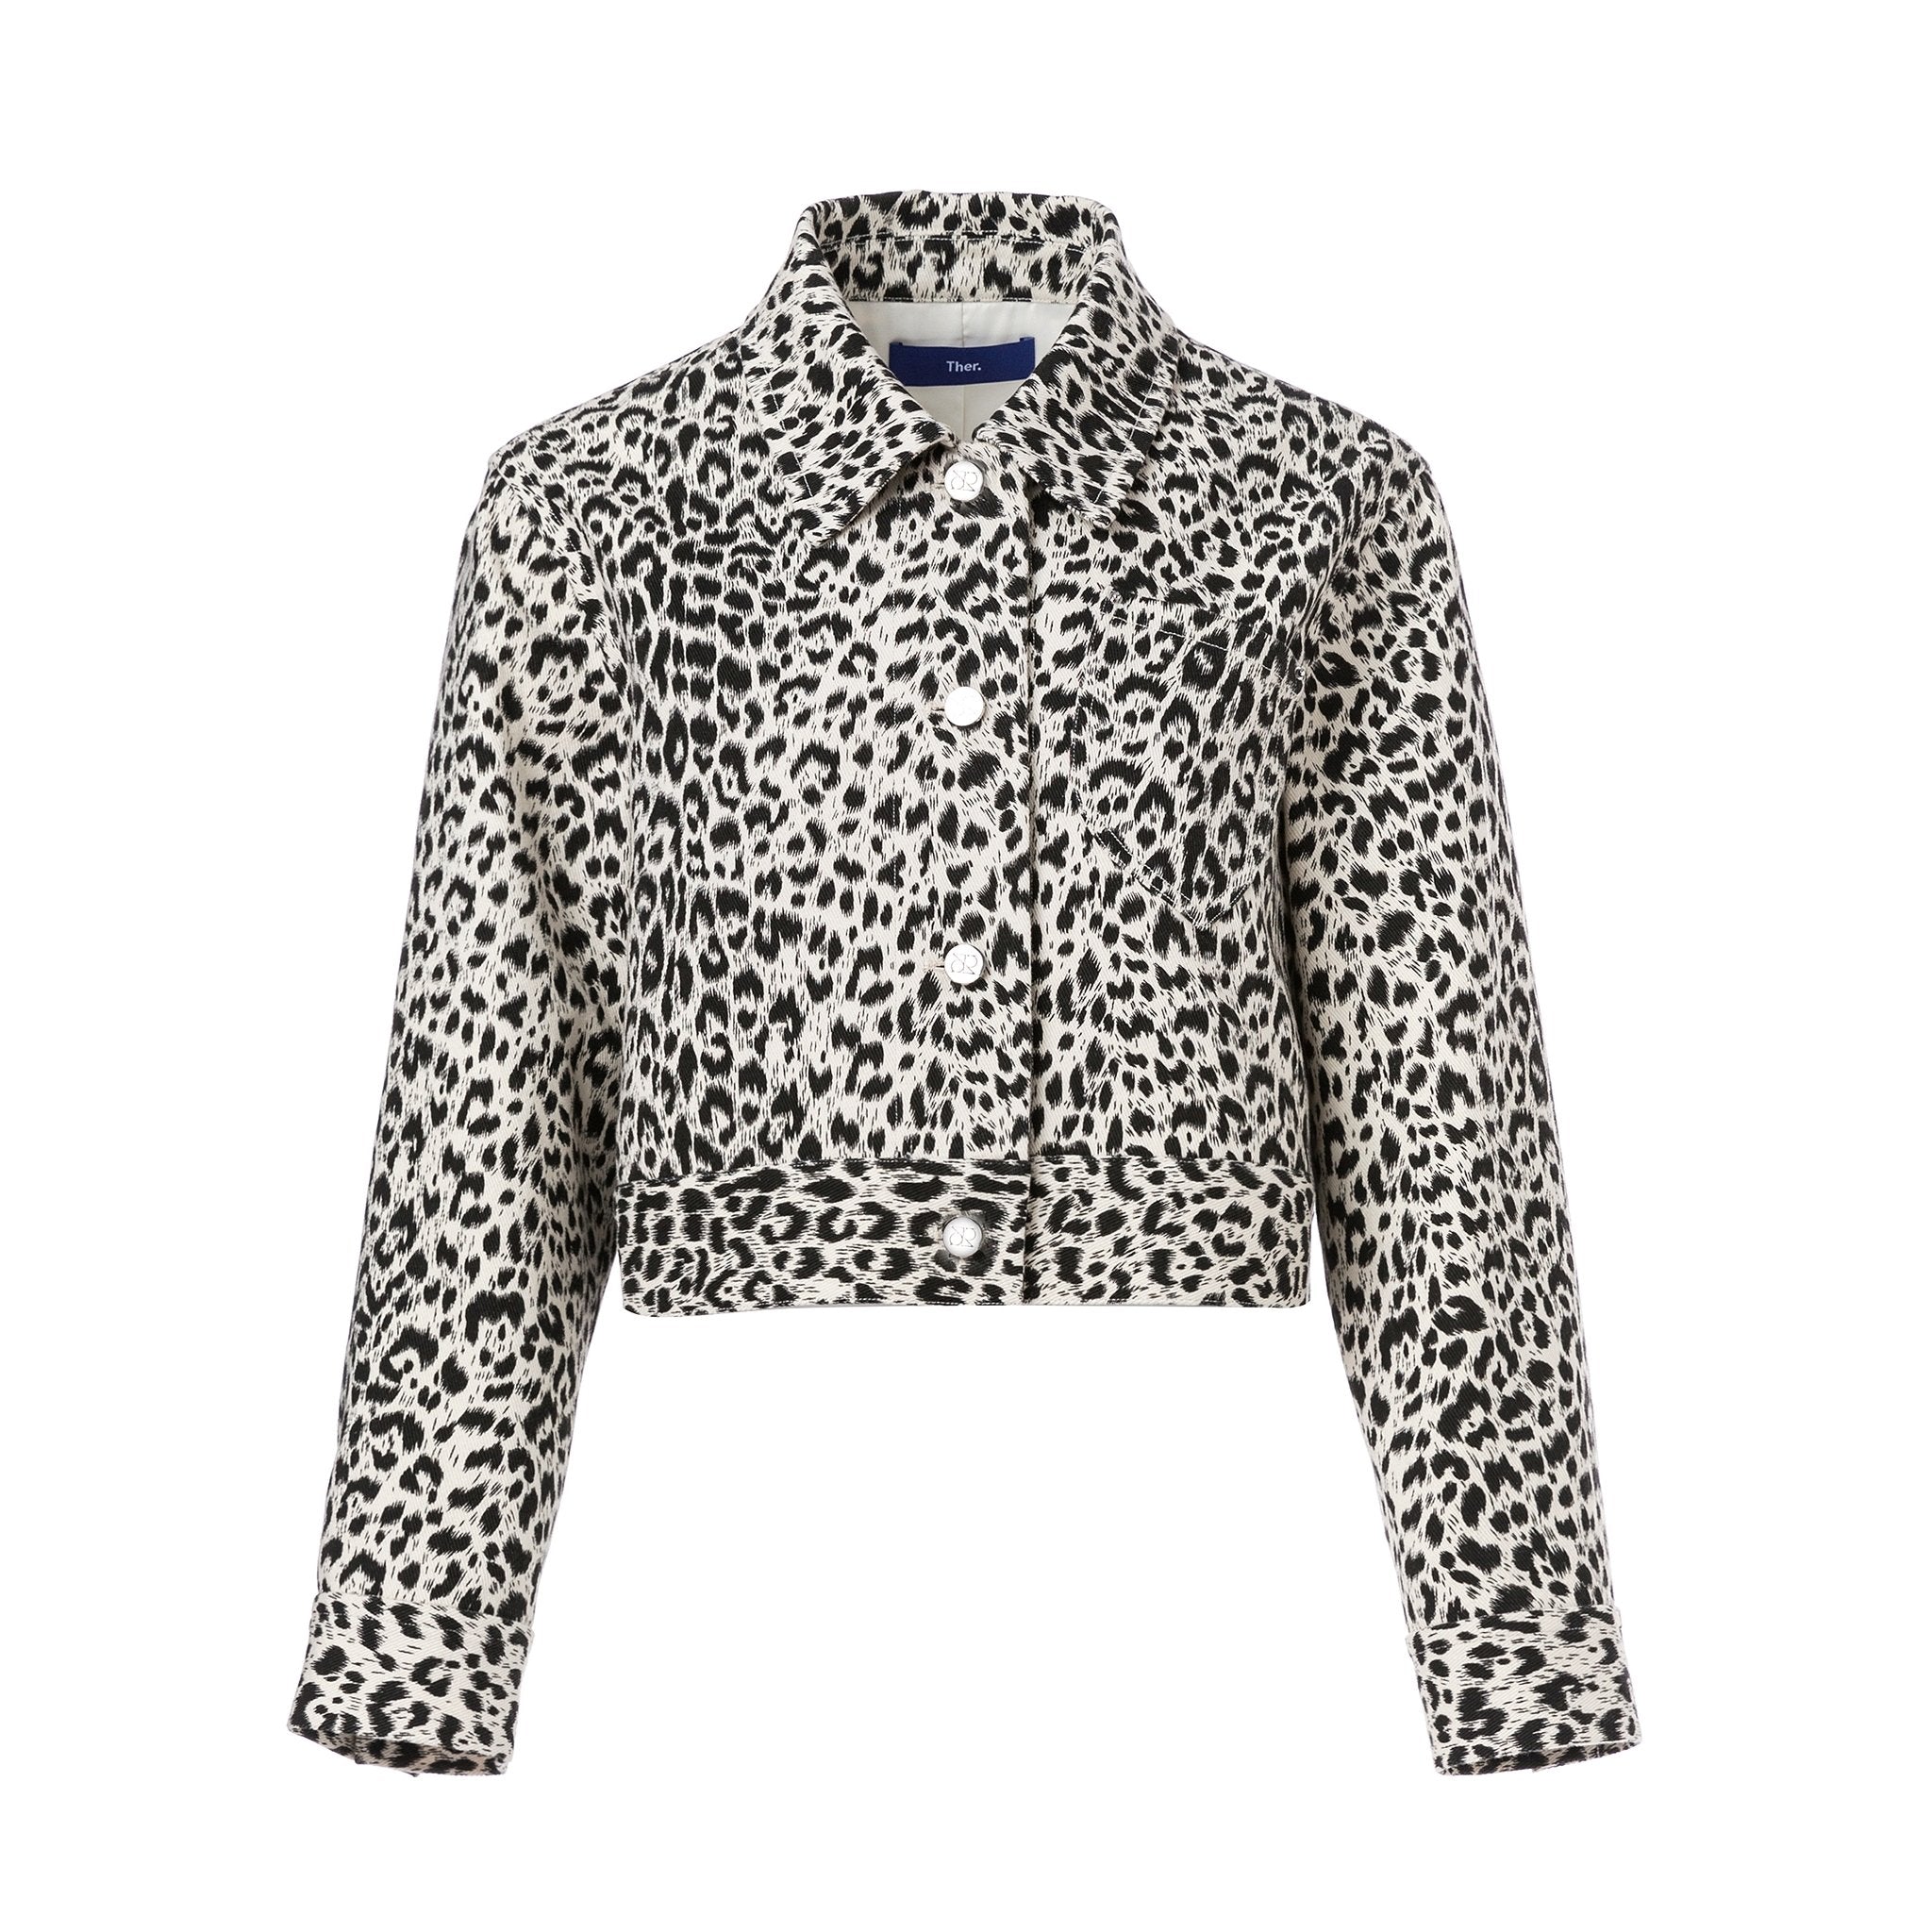 Ther. Leopard Print Denim Short Jacket & MADA IN CHINA